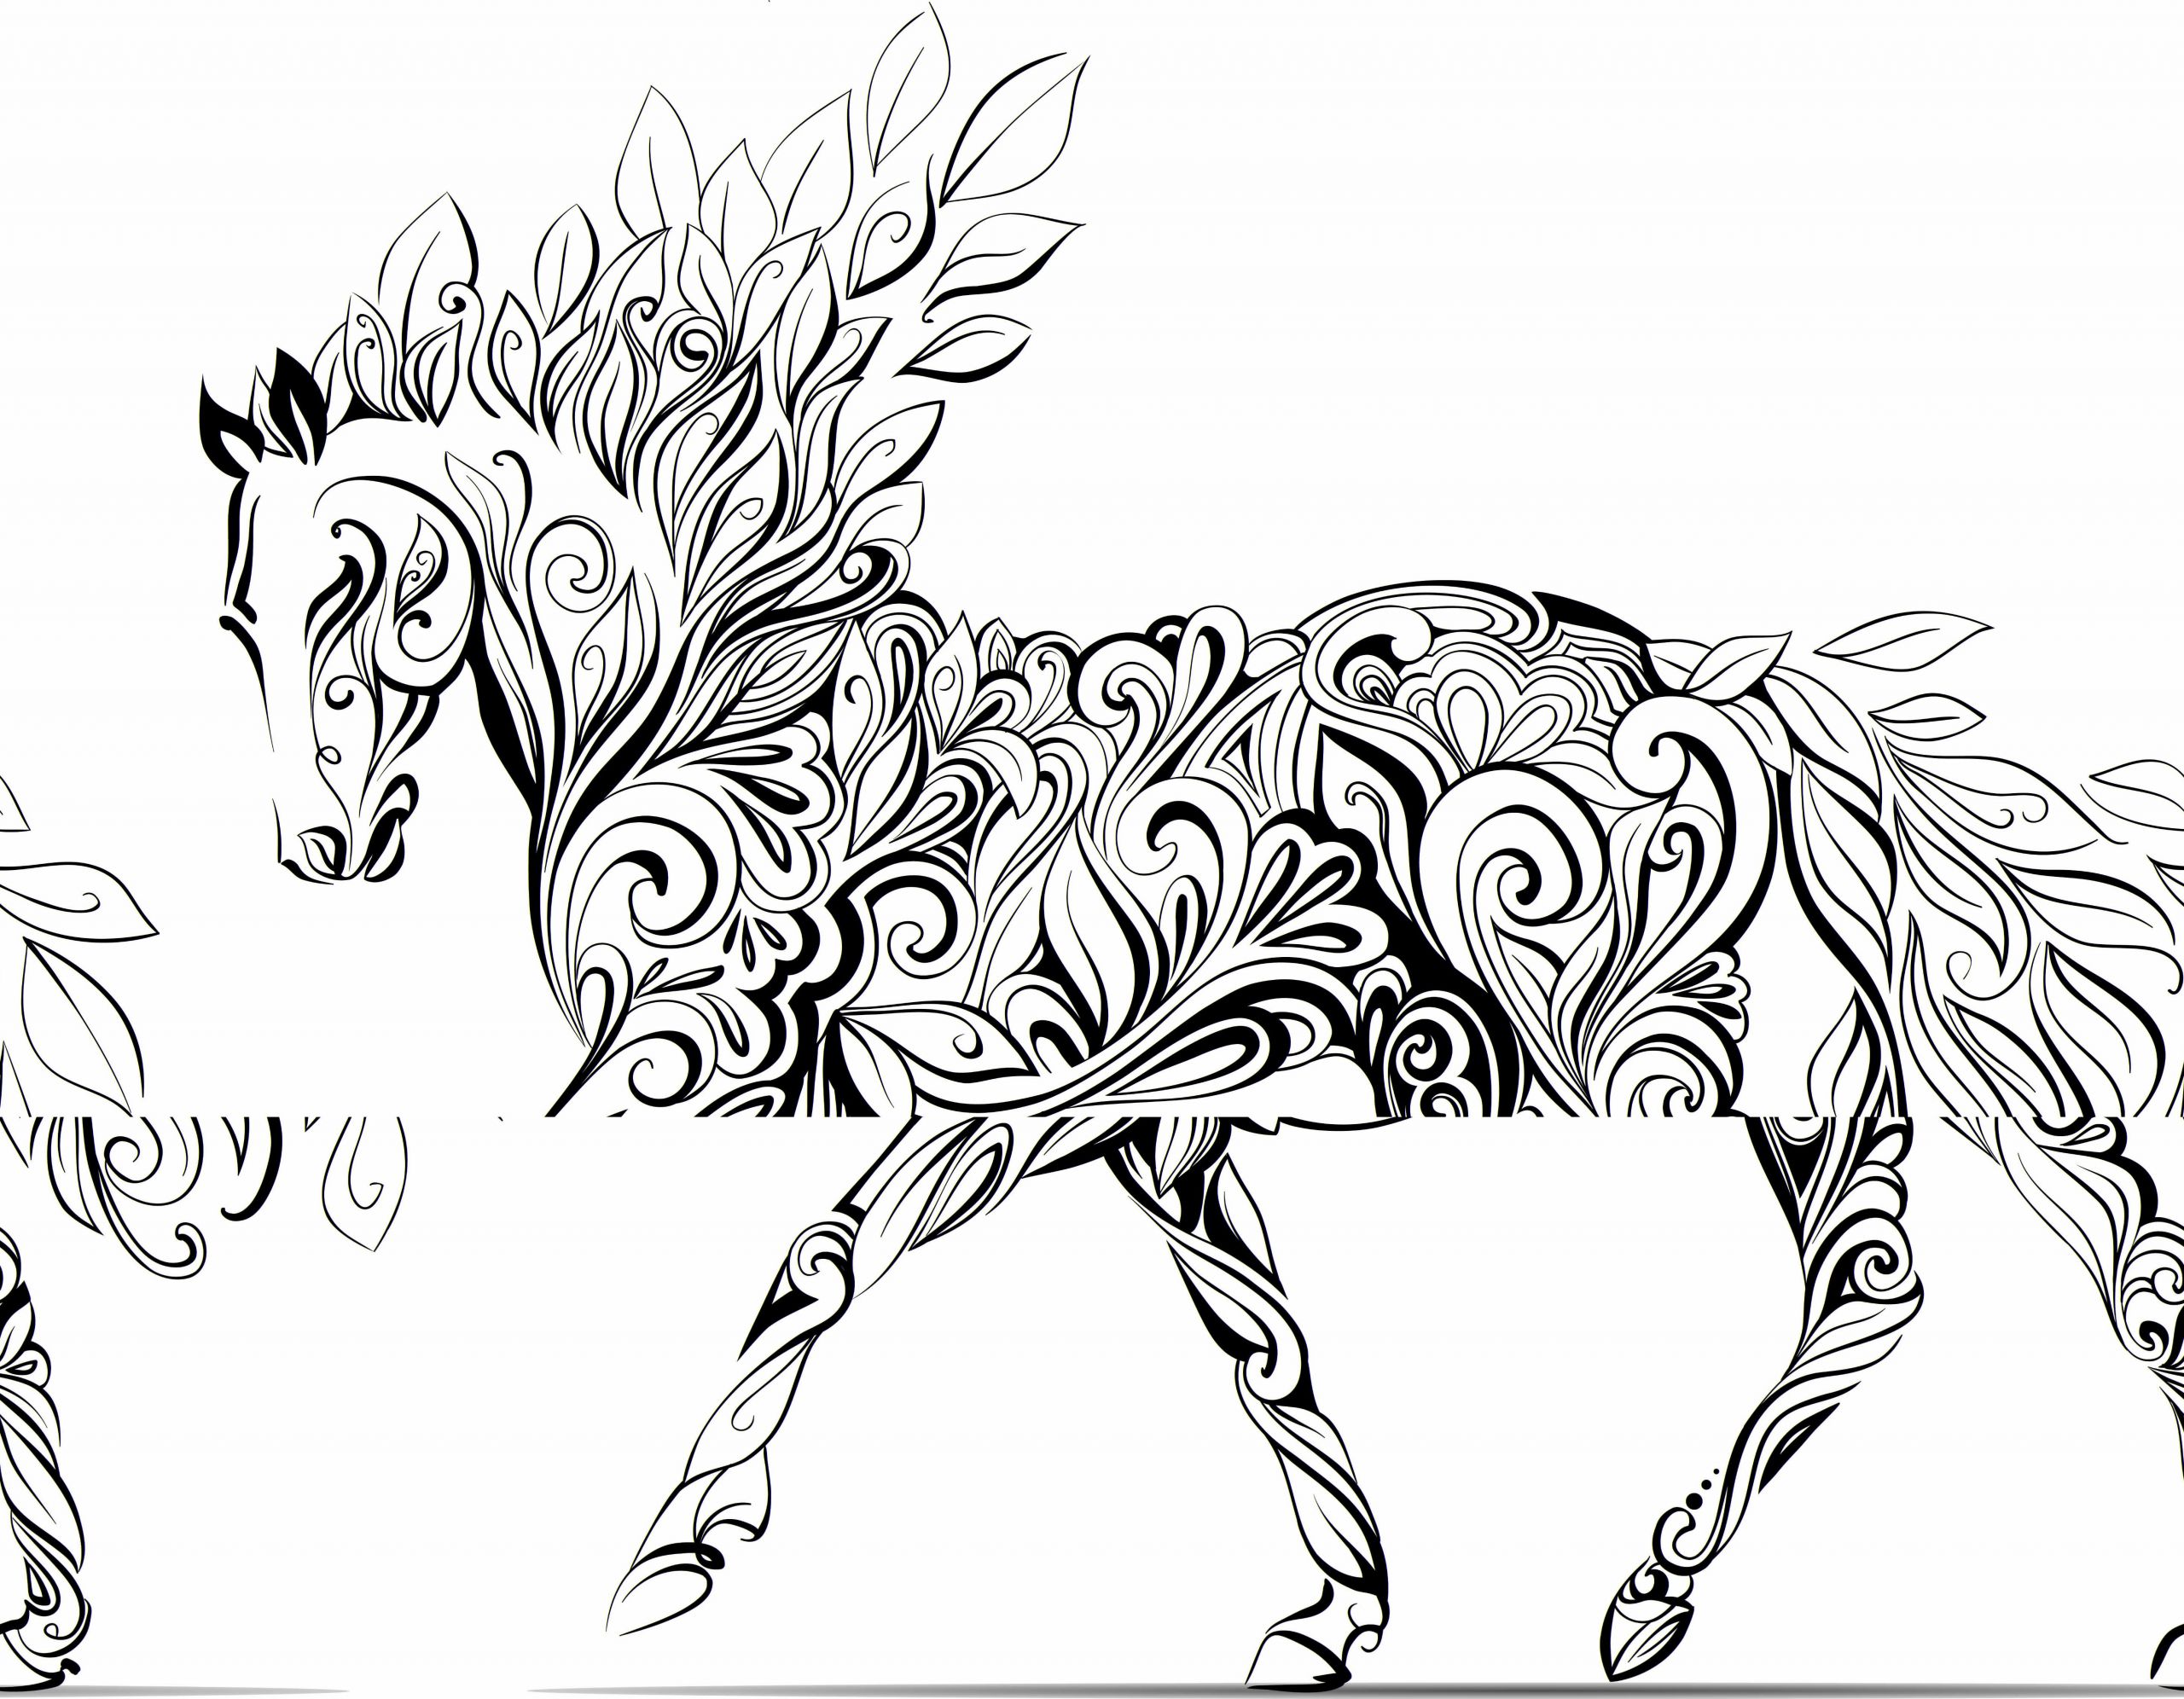 Adult Coloring Pages Horses
 adult horse coloring pages children a to color wallpapers